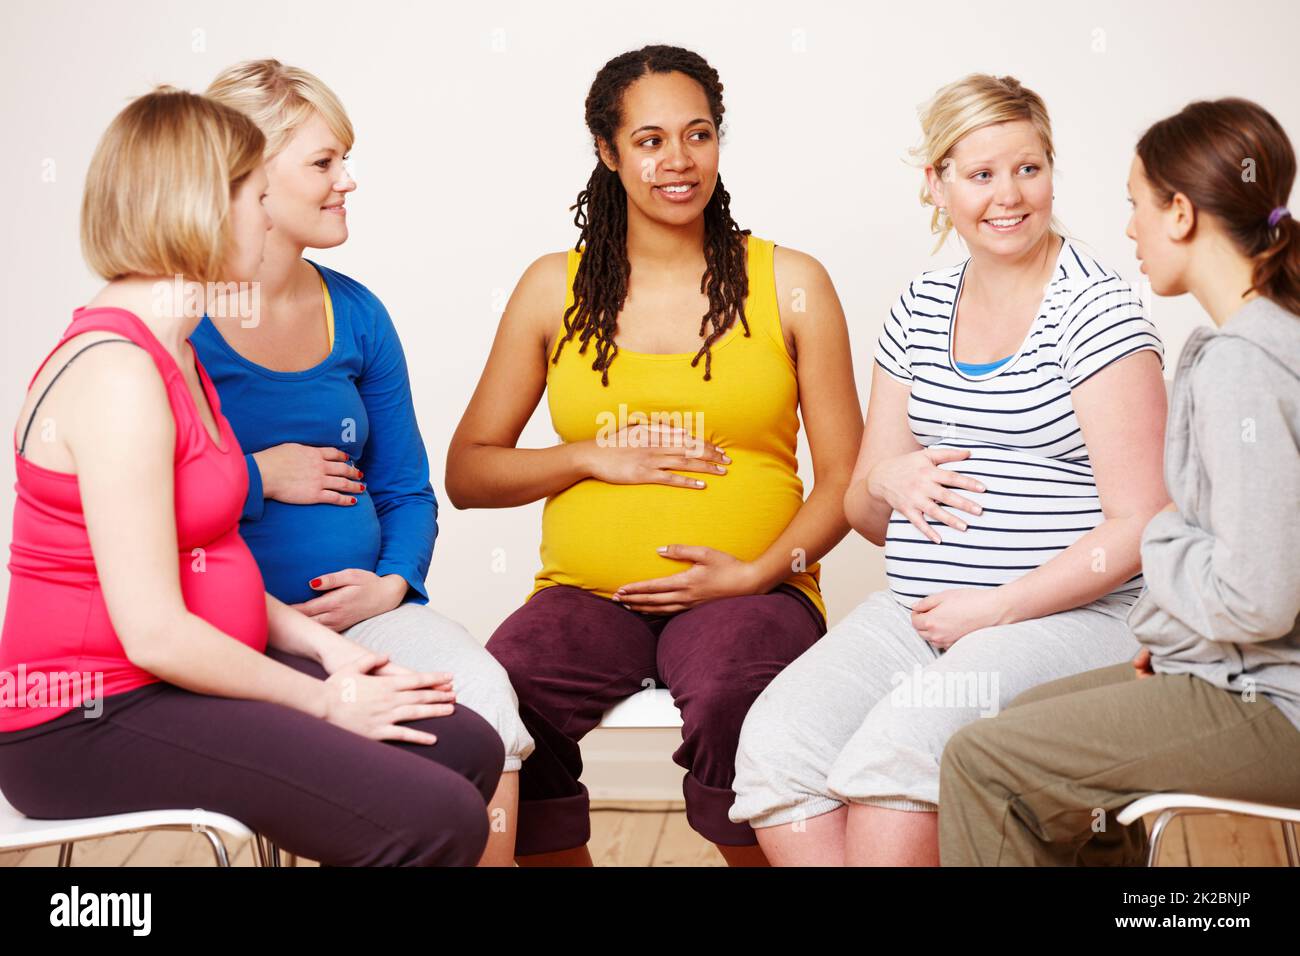 Discussing their hopes and dreams. A group of pregnant women sitting down together to share their feelings. Stock Photo